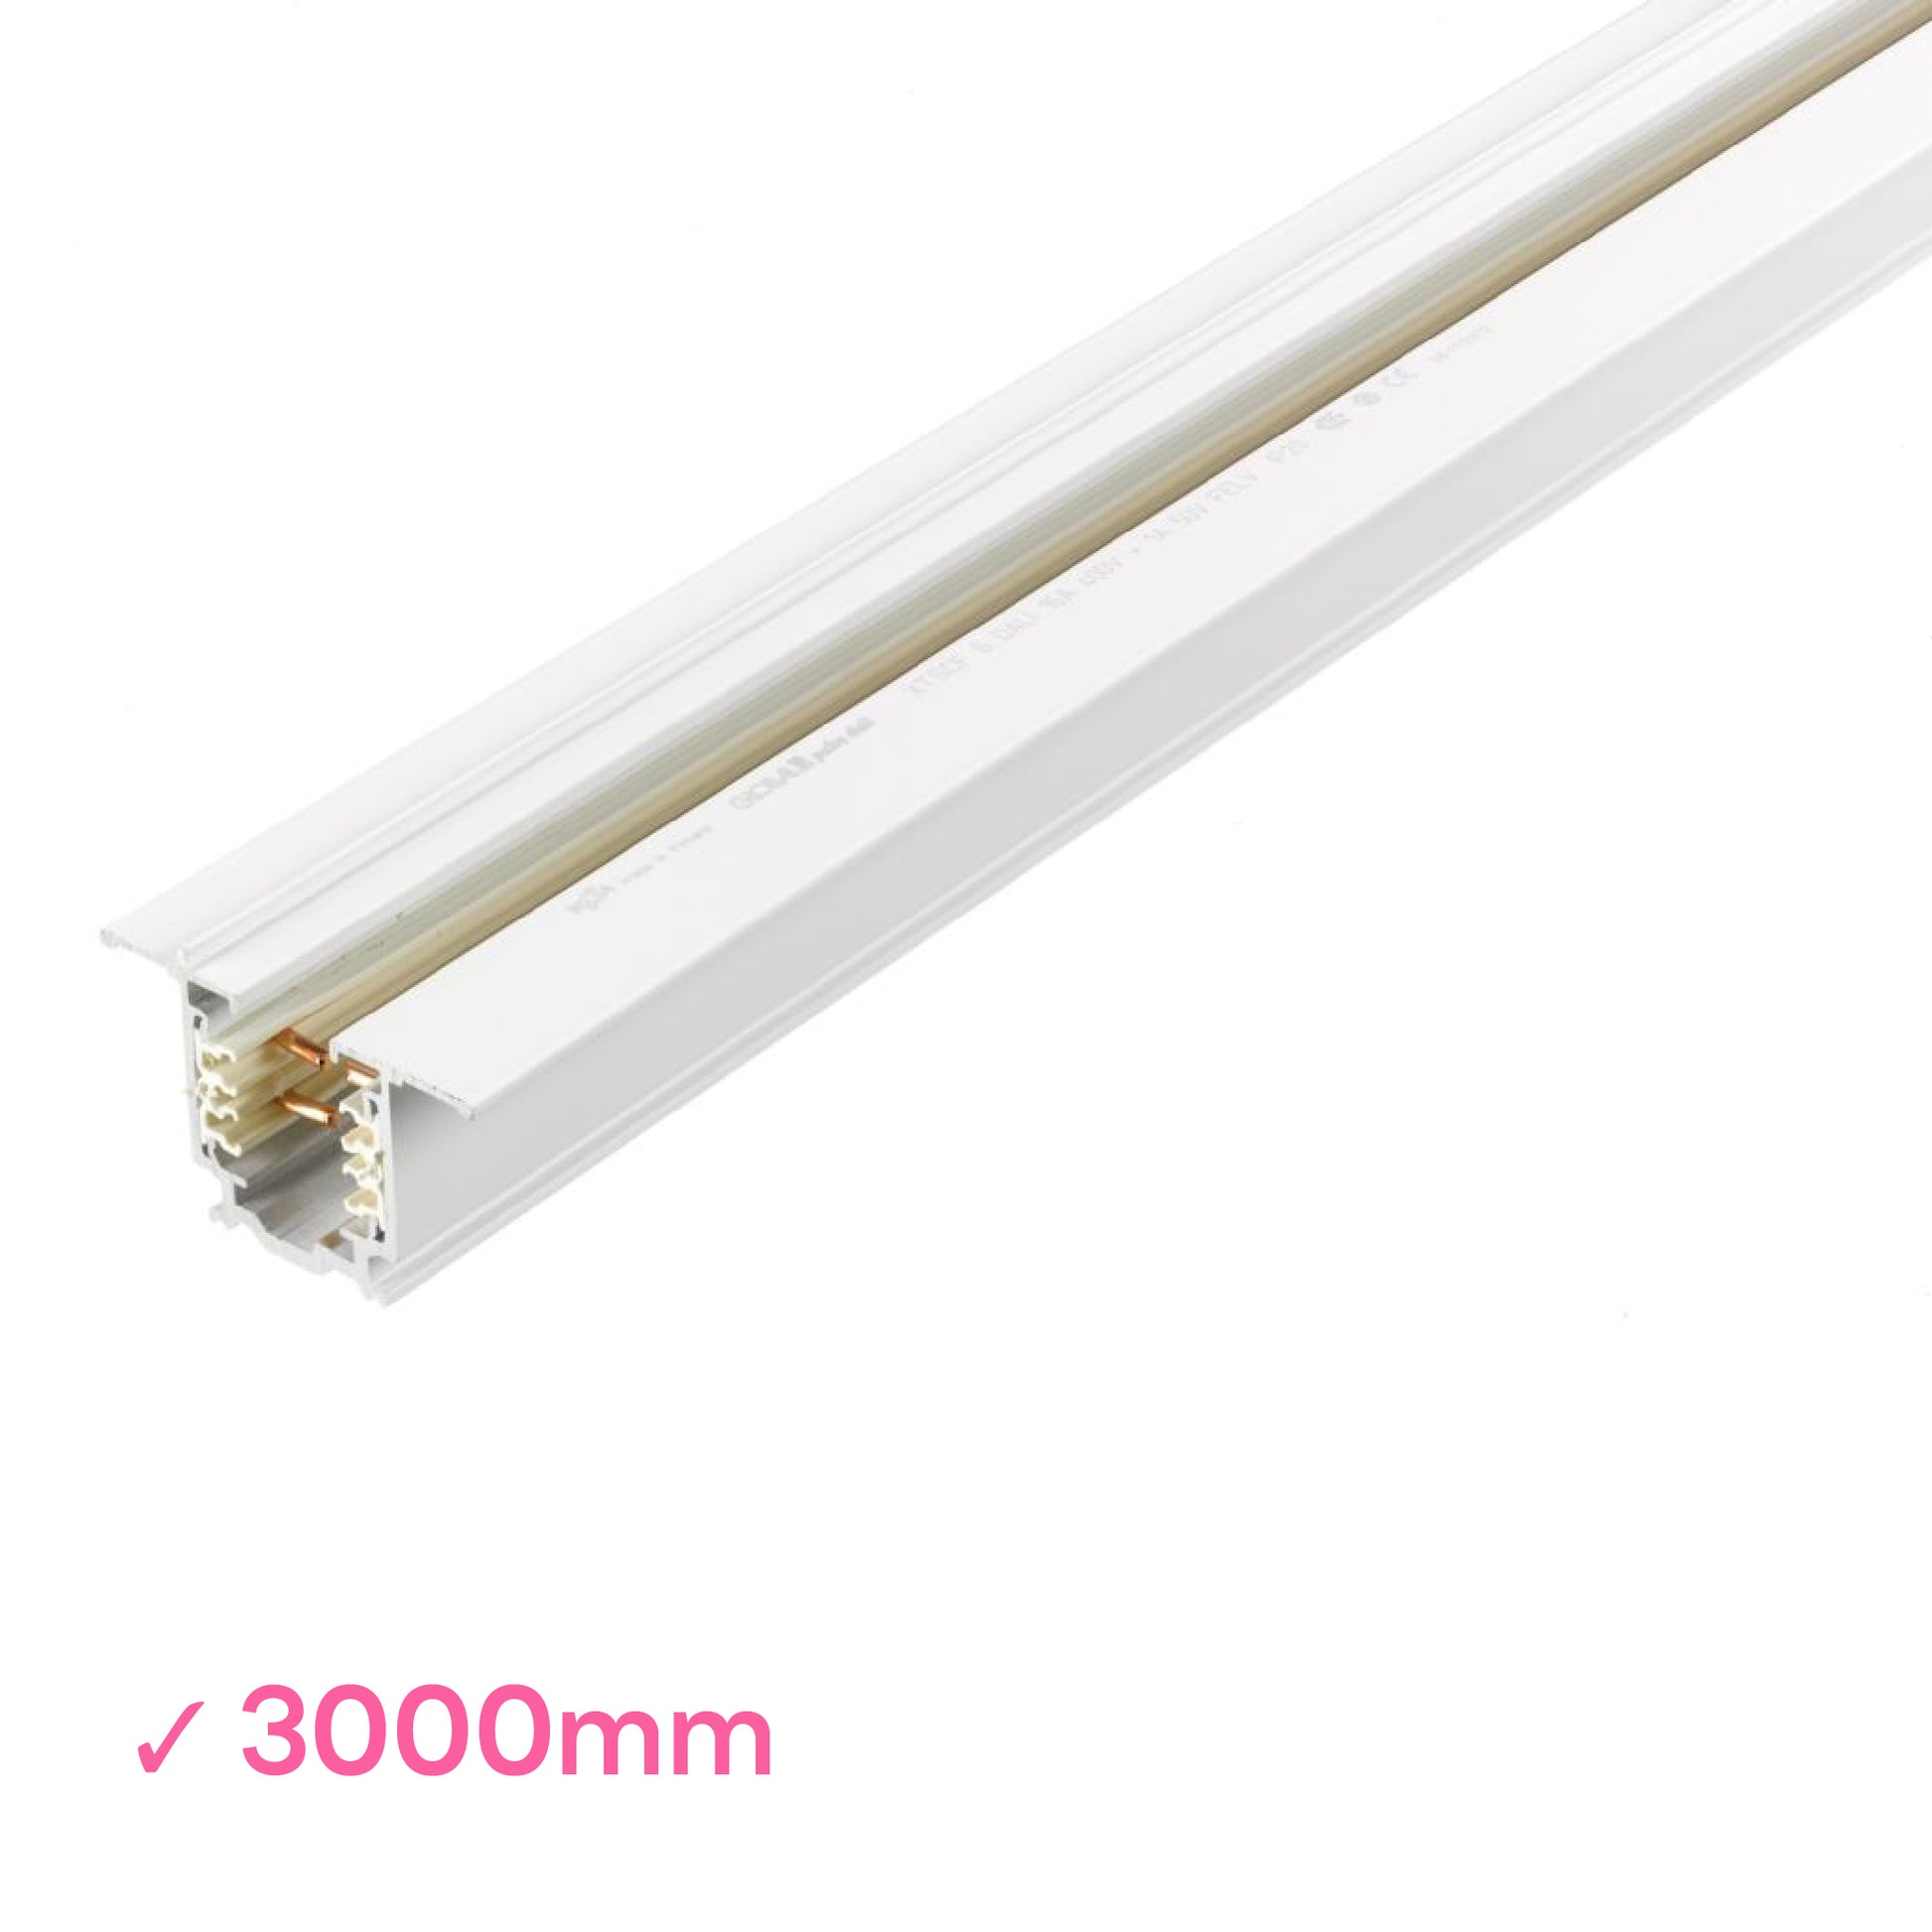 Global 3000mm or 3m white powder coated DALI 3 Circuit Track 3 metre recessed mounted track by Nordic Aluminium <XTSCF6300-3>